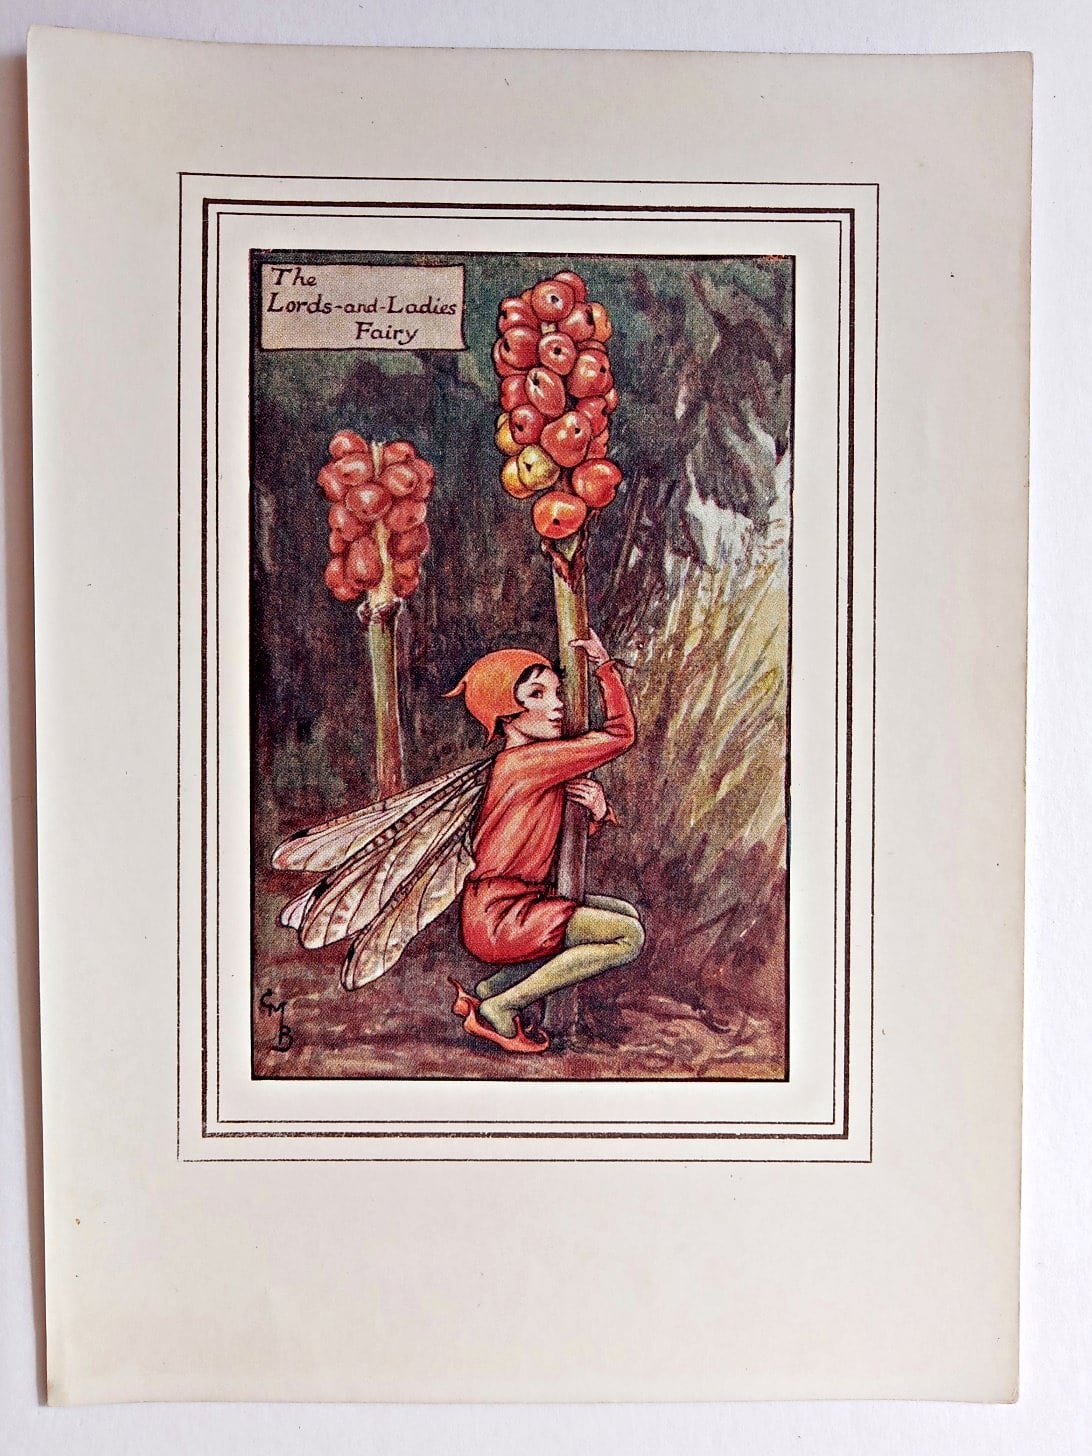 Autumn Flower Fairies c1935 Lord's-and-ladies Fairy by Cicely Mary Barker 